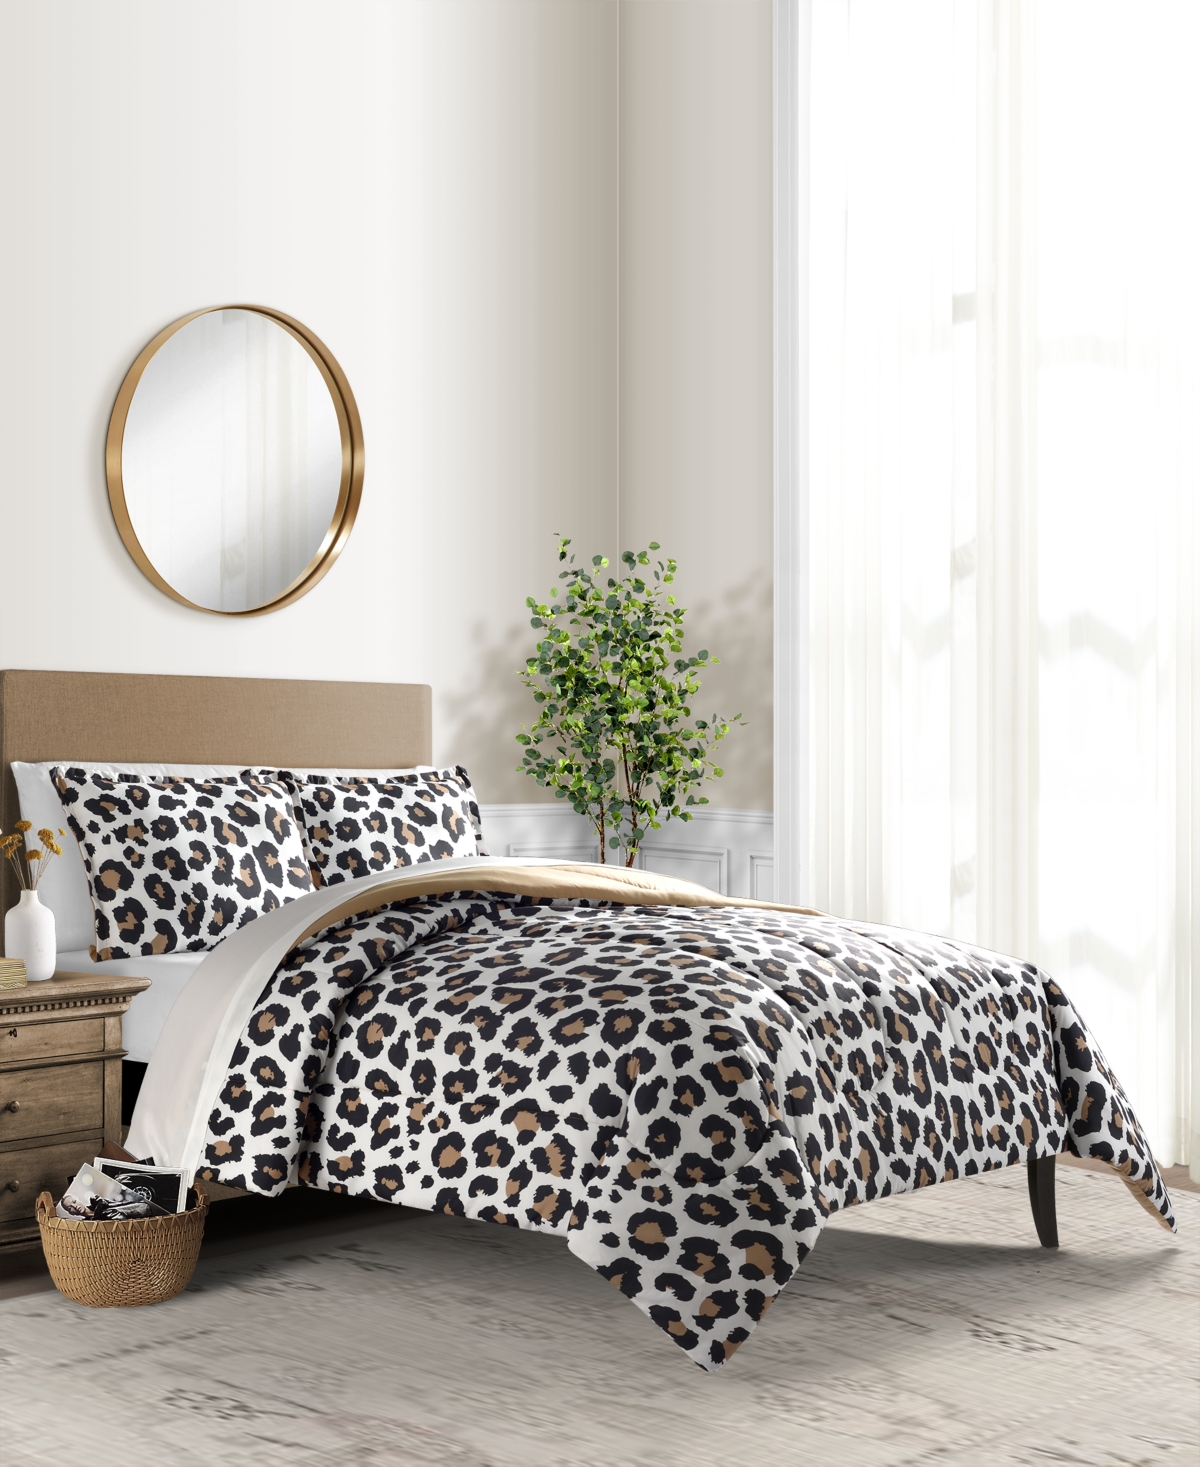 2-Piece Sunham Reversible Comforter Bedding Sets (3 Colors, Twin) $11.96 + Free Store Pickup at Macy's or FS on $25+